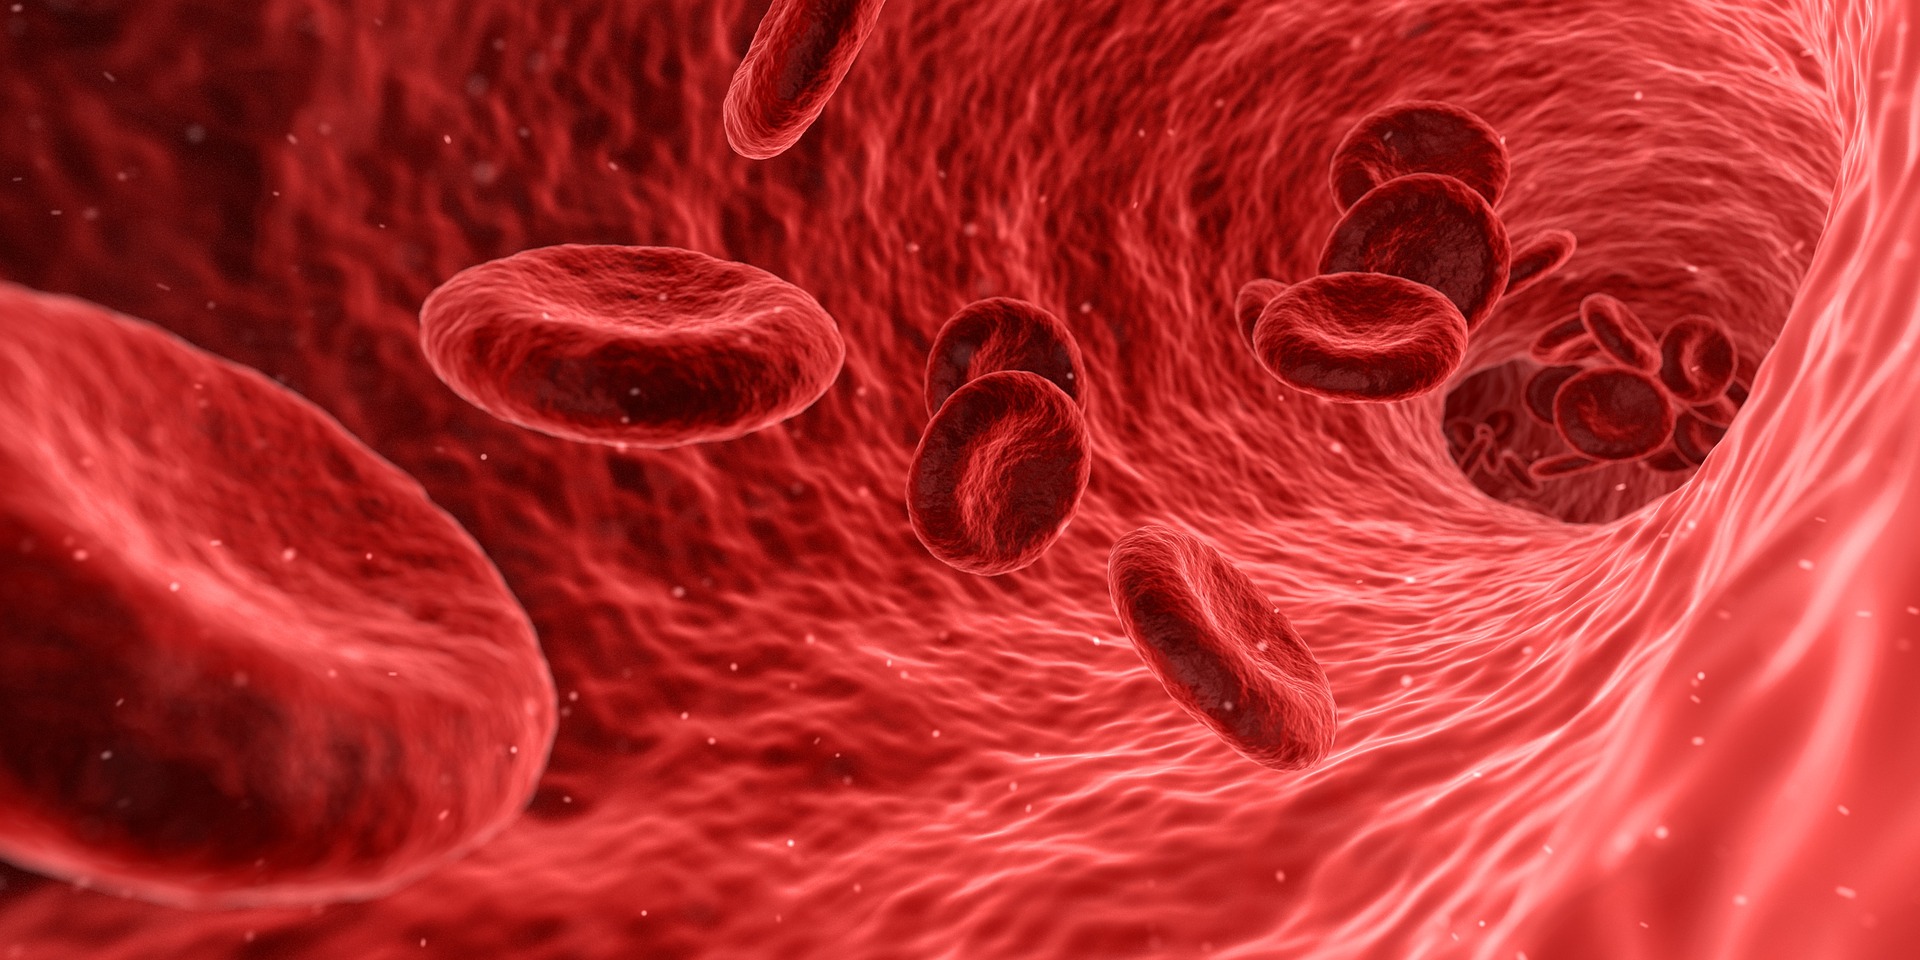 Cell Therapy to Treat Sickle Cell Disease